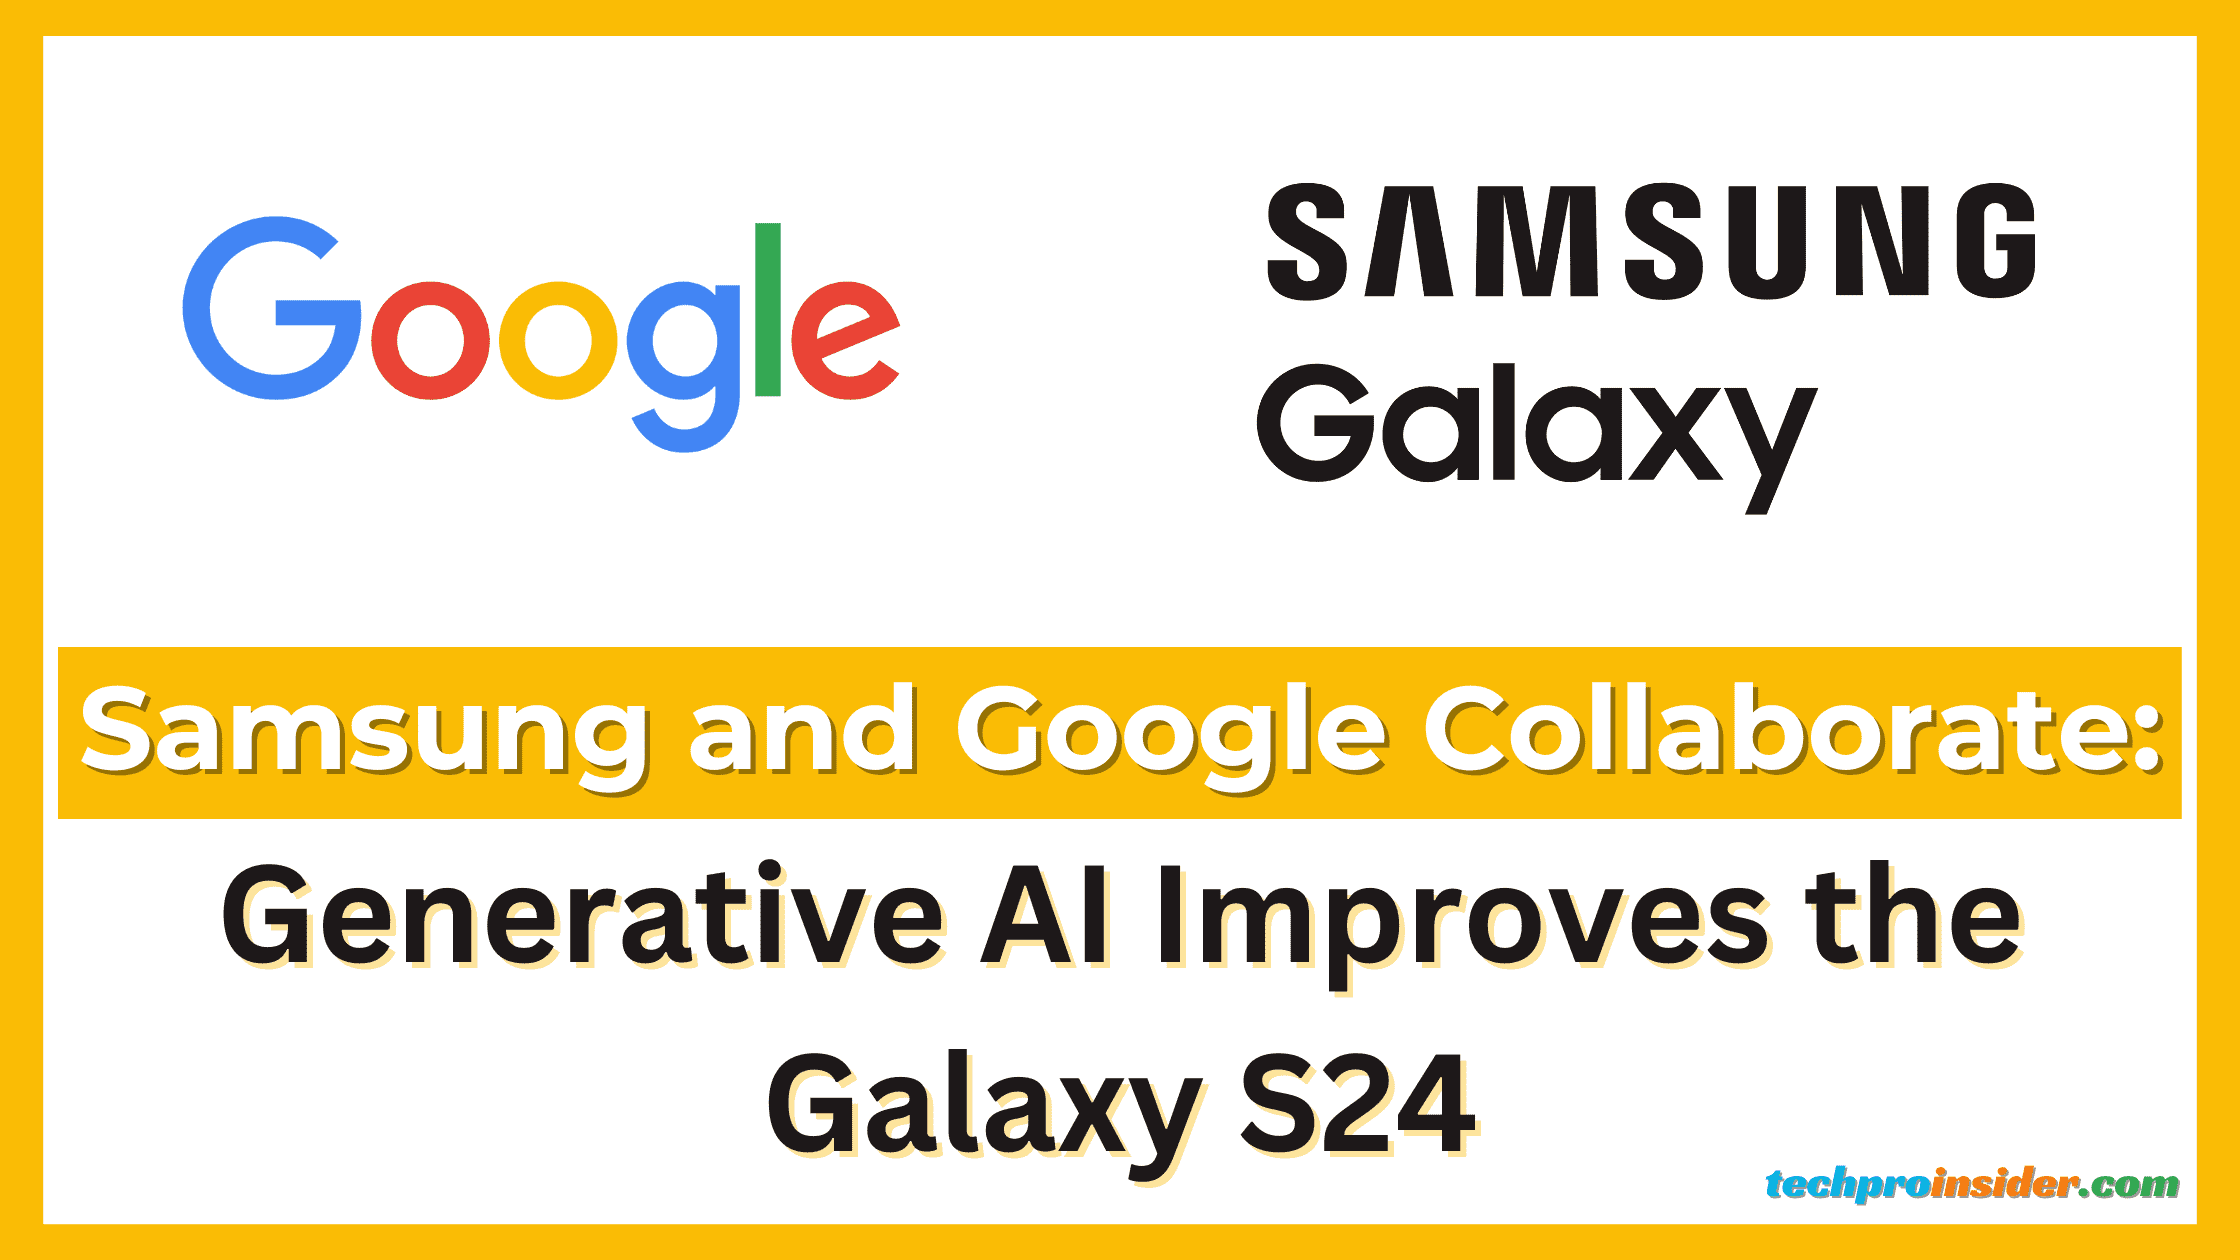 Samsung, Google, Galaxy S24, Generative AI, Partnership, Gemini Nano, Gemini Pro, Imagen 2, Mobile innovation, On-device AI, Context-aware interactions, Productivity, Creativity, Text-to-Image Alchemy, Personalized content, Cloud-based AI, Smarter notes, Voice recorder, Keyboard enhancements, Predictive typing, Personalized emoji, AI assistant, Anticipatory features, Settings adjustments, Creative style learning, Personalized mobile experience, Intelligent companions, Future technology, Evolution of smartphones, AI-powered devices, Game-changer, Cutting-edge technology, Futuristic, Contextual suggestions, Automatic completions, AI-powered flair, Photorealistic edits, Artistic expression, Mobile intelligence, Redefining technology, Instant interactions, Organized insights, Future of mobile, AI prowess, Tailor-made content, Seamless integration, Innovative features, Advancements in communication, Exciting possibilities, Intelligent future.